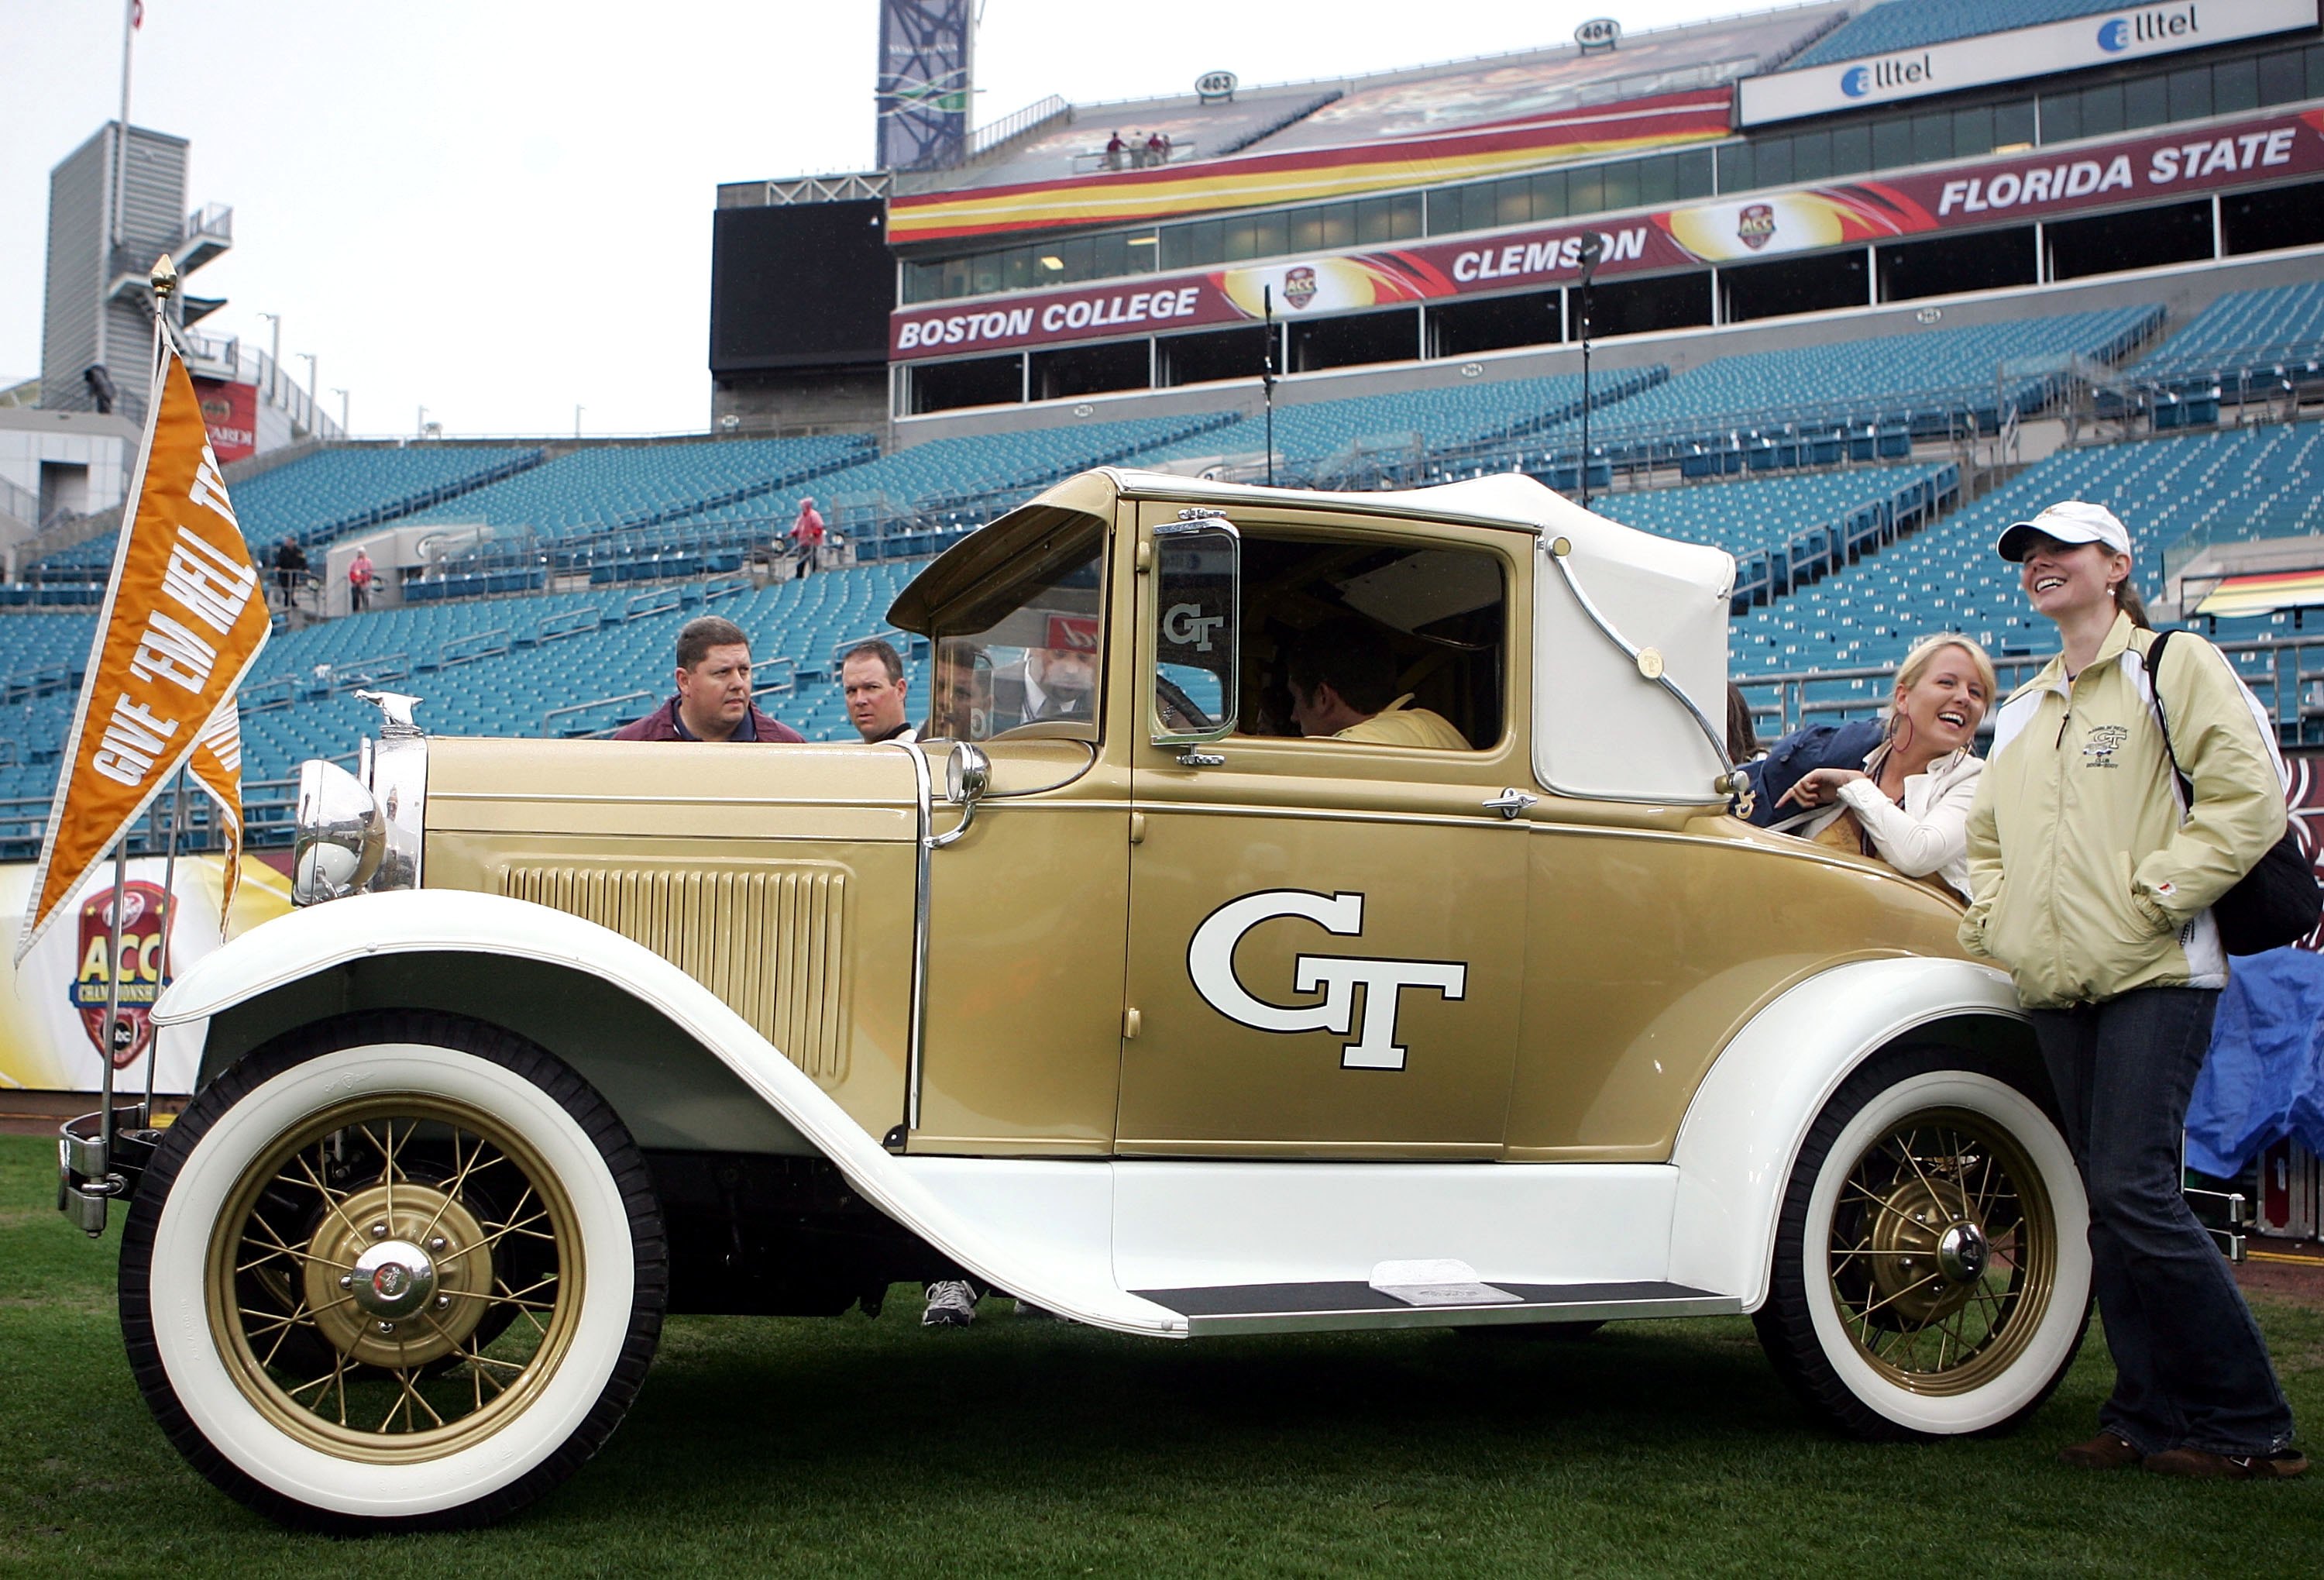 JACKSONVILLE, FL - DECEMBER 02:  Georgia Tech Yellow Jackets fans drive onto the field in an antique car prior to a game against the Wake Forest Demon Deacons during the Atlantic Coast Conference Championship on December 2, 2006 at Alltel Stadium in Jacks